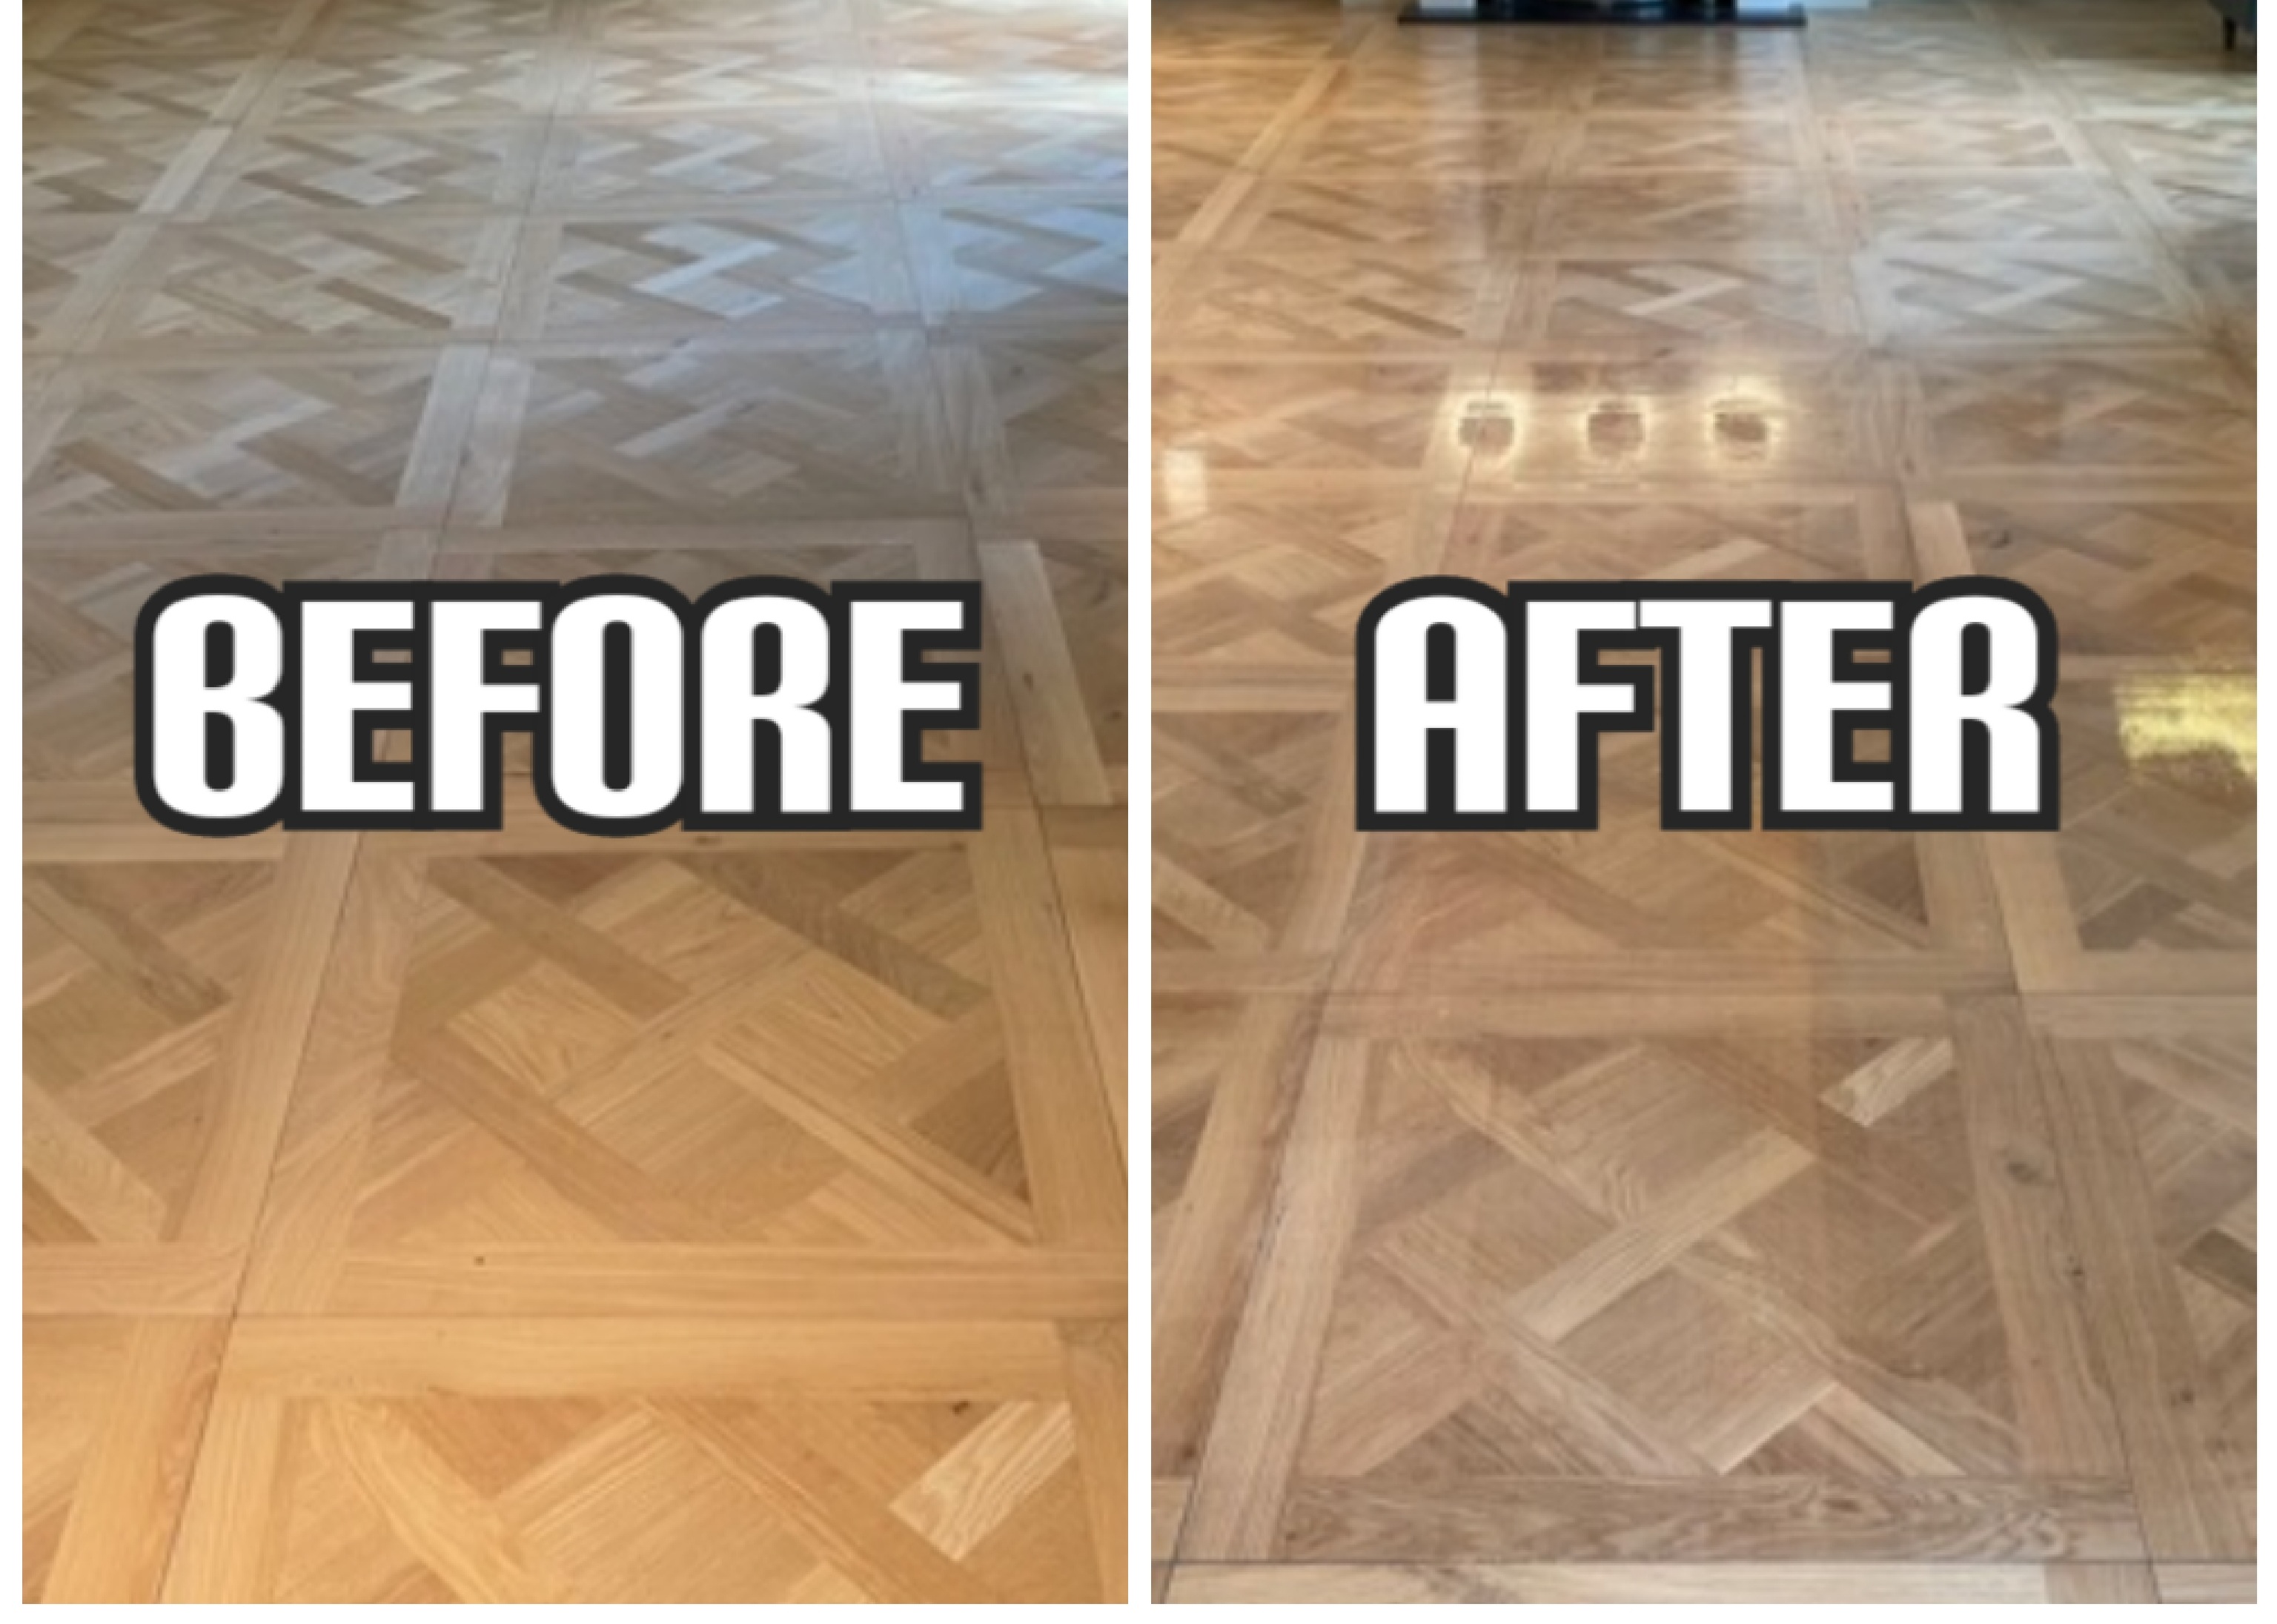 Before and after Floor sanding and refinishing with satin lacquer in a house, Kensington